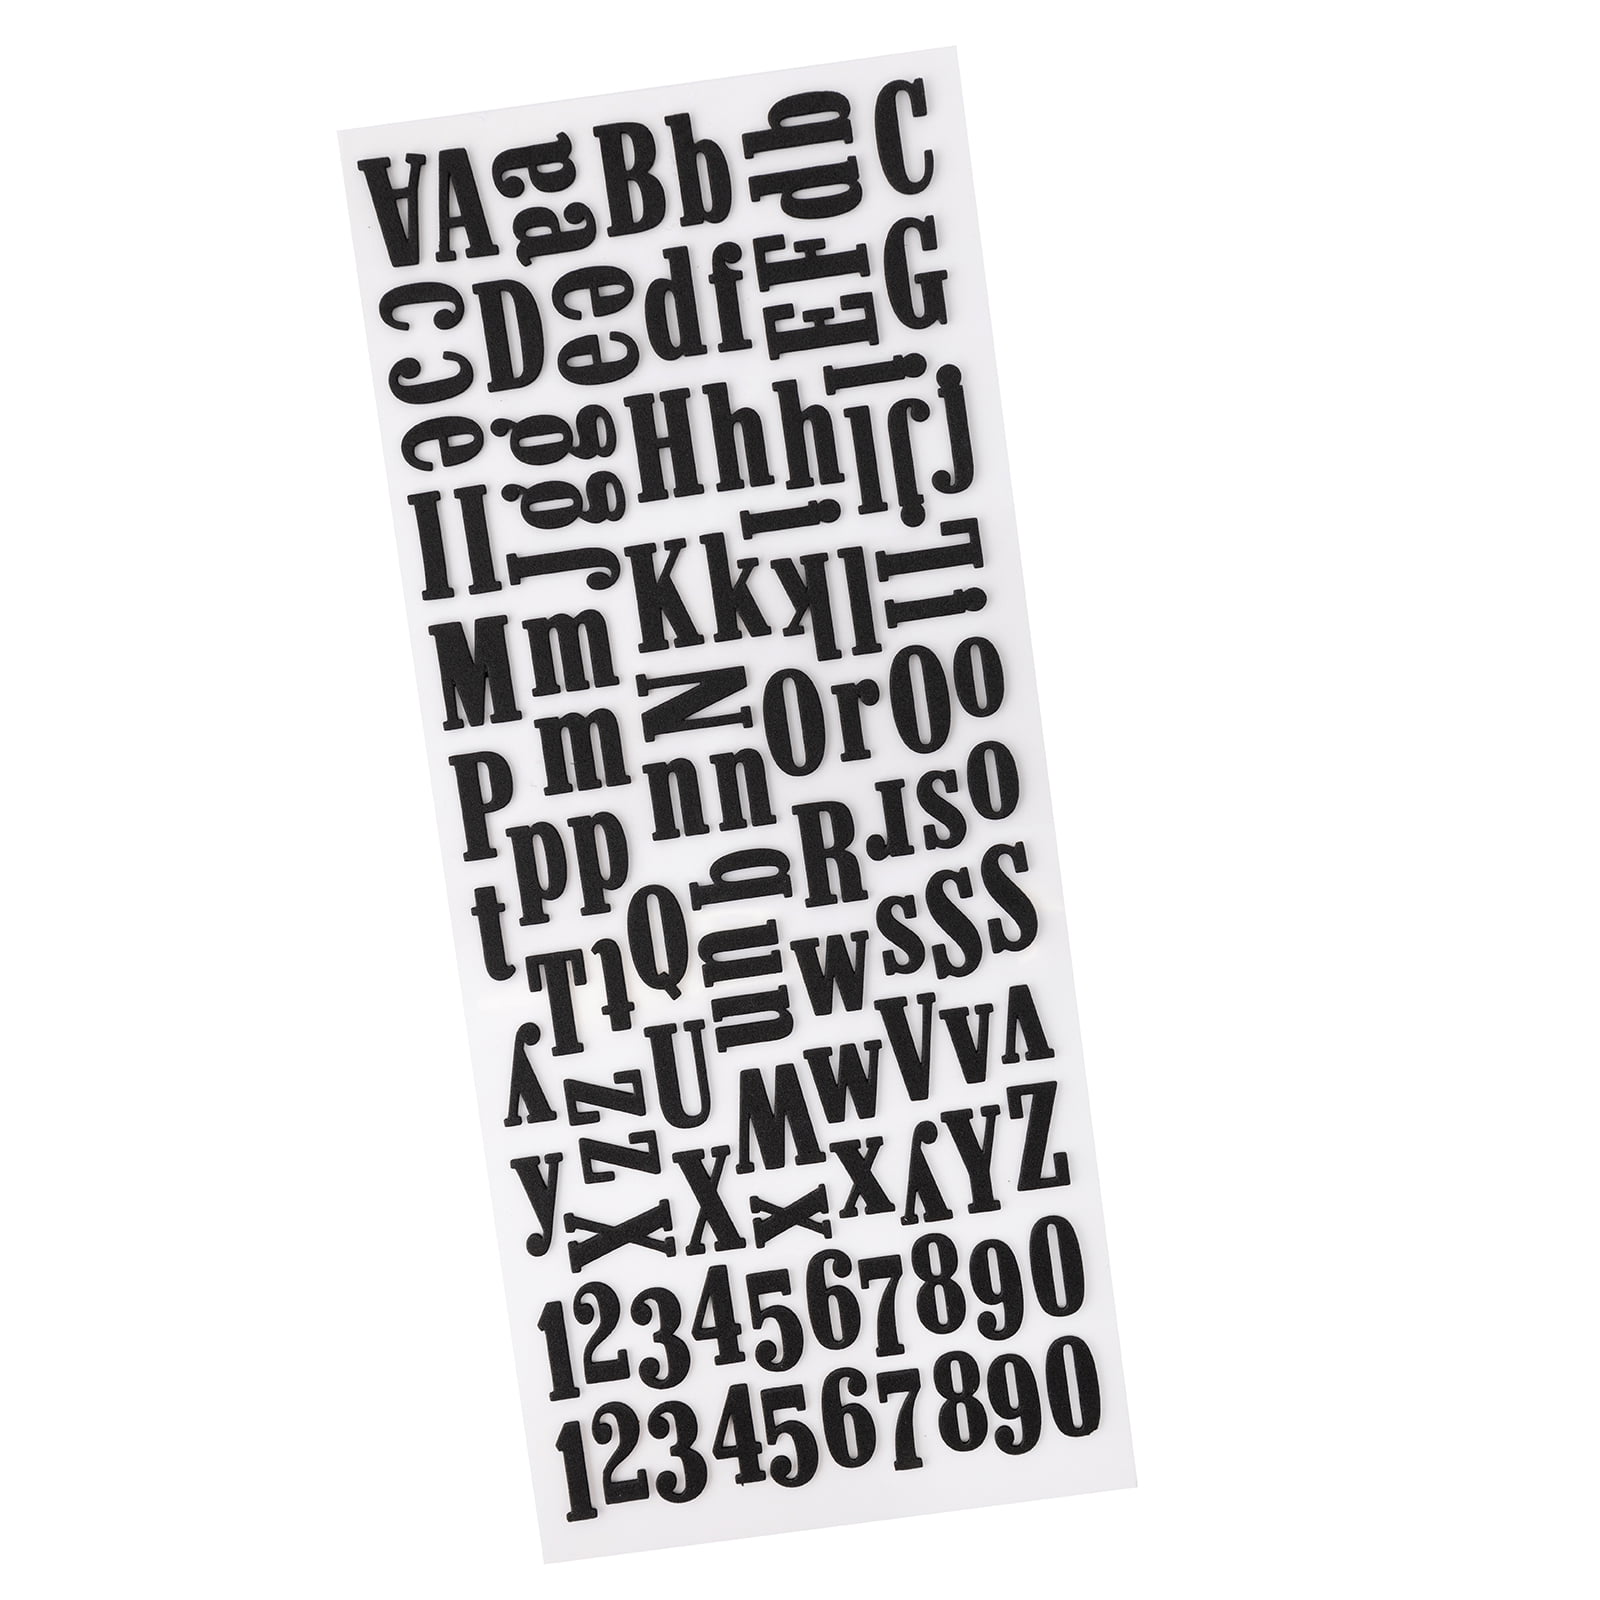 6 Pack Sticko Alphabet Stickers-Black Dot Numbers Small 5290314